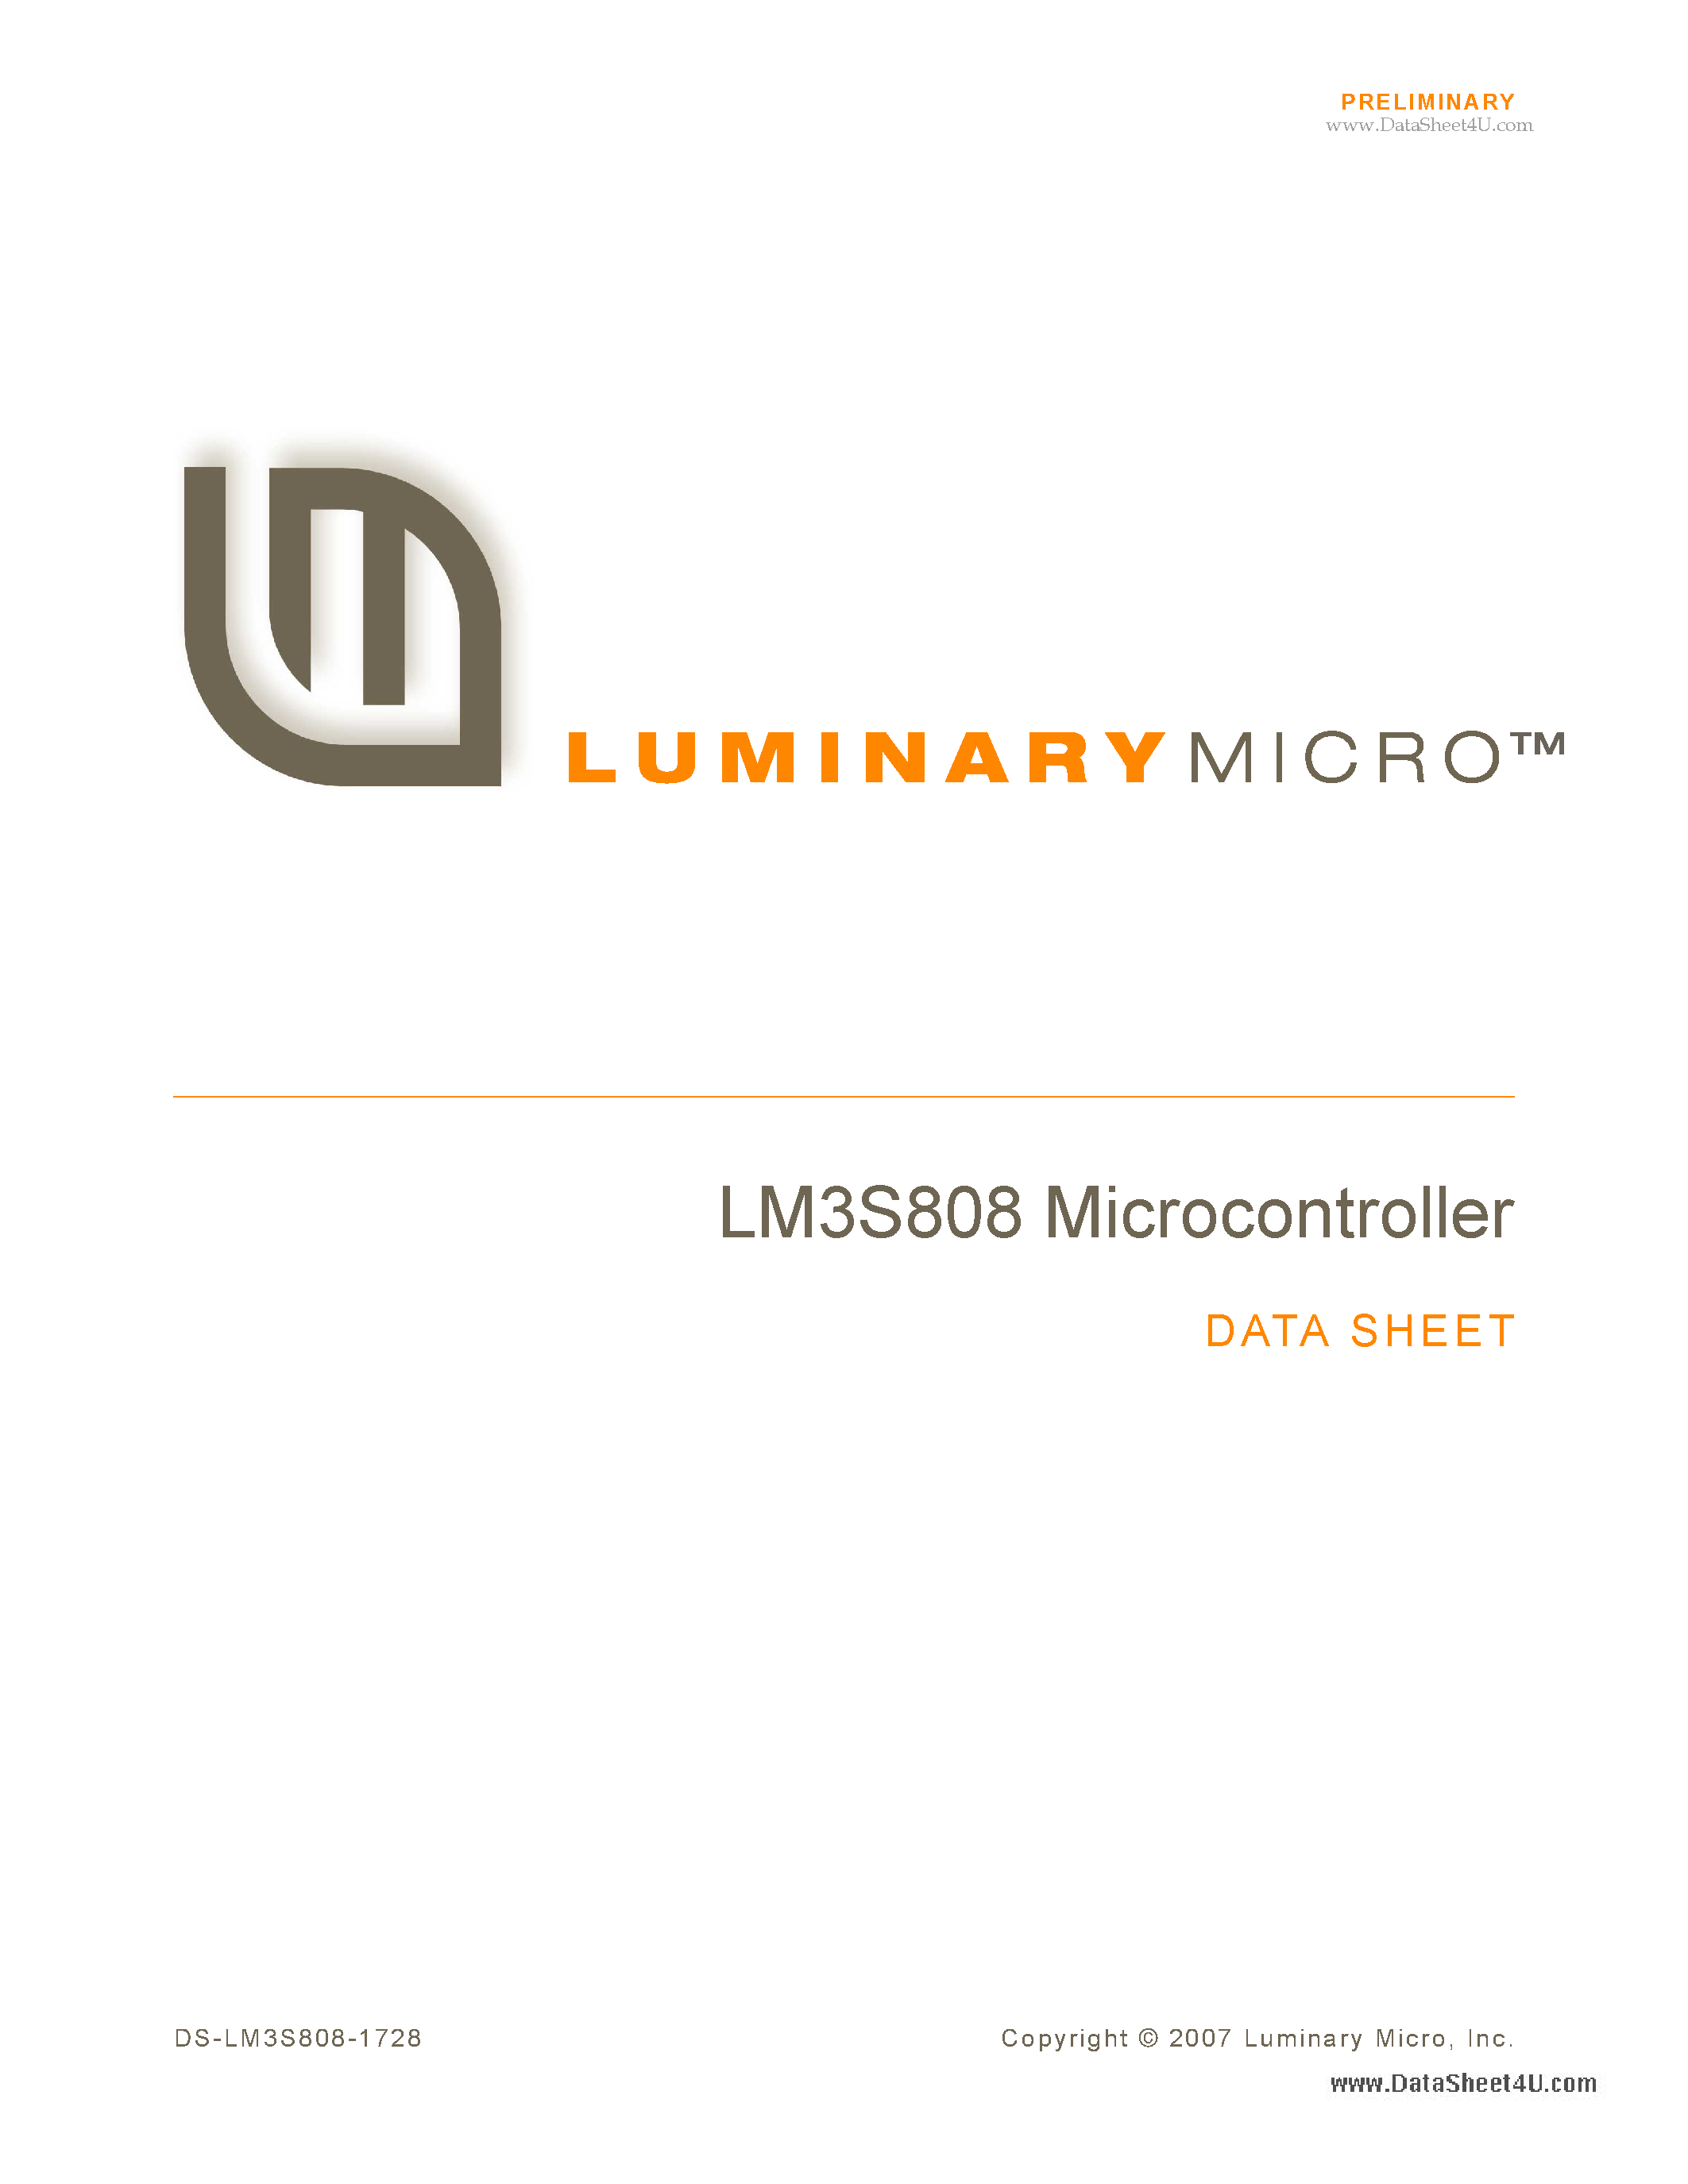 Datasheet LM3S808 - Microcontroller page 1